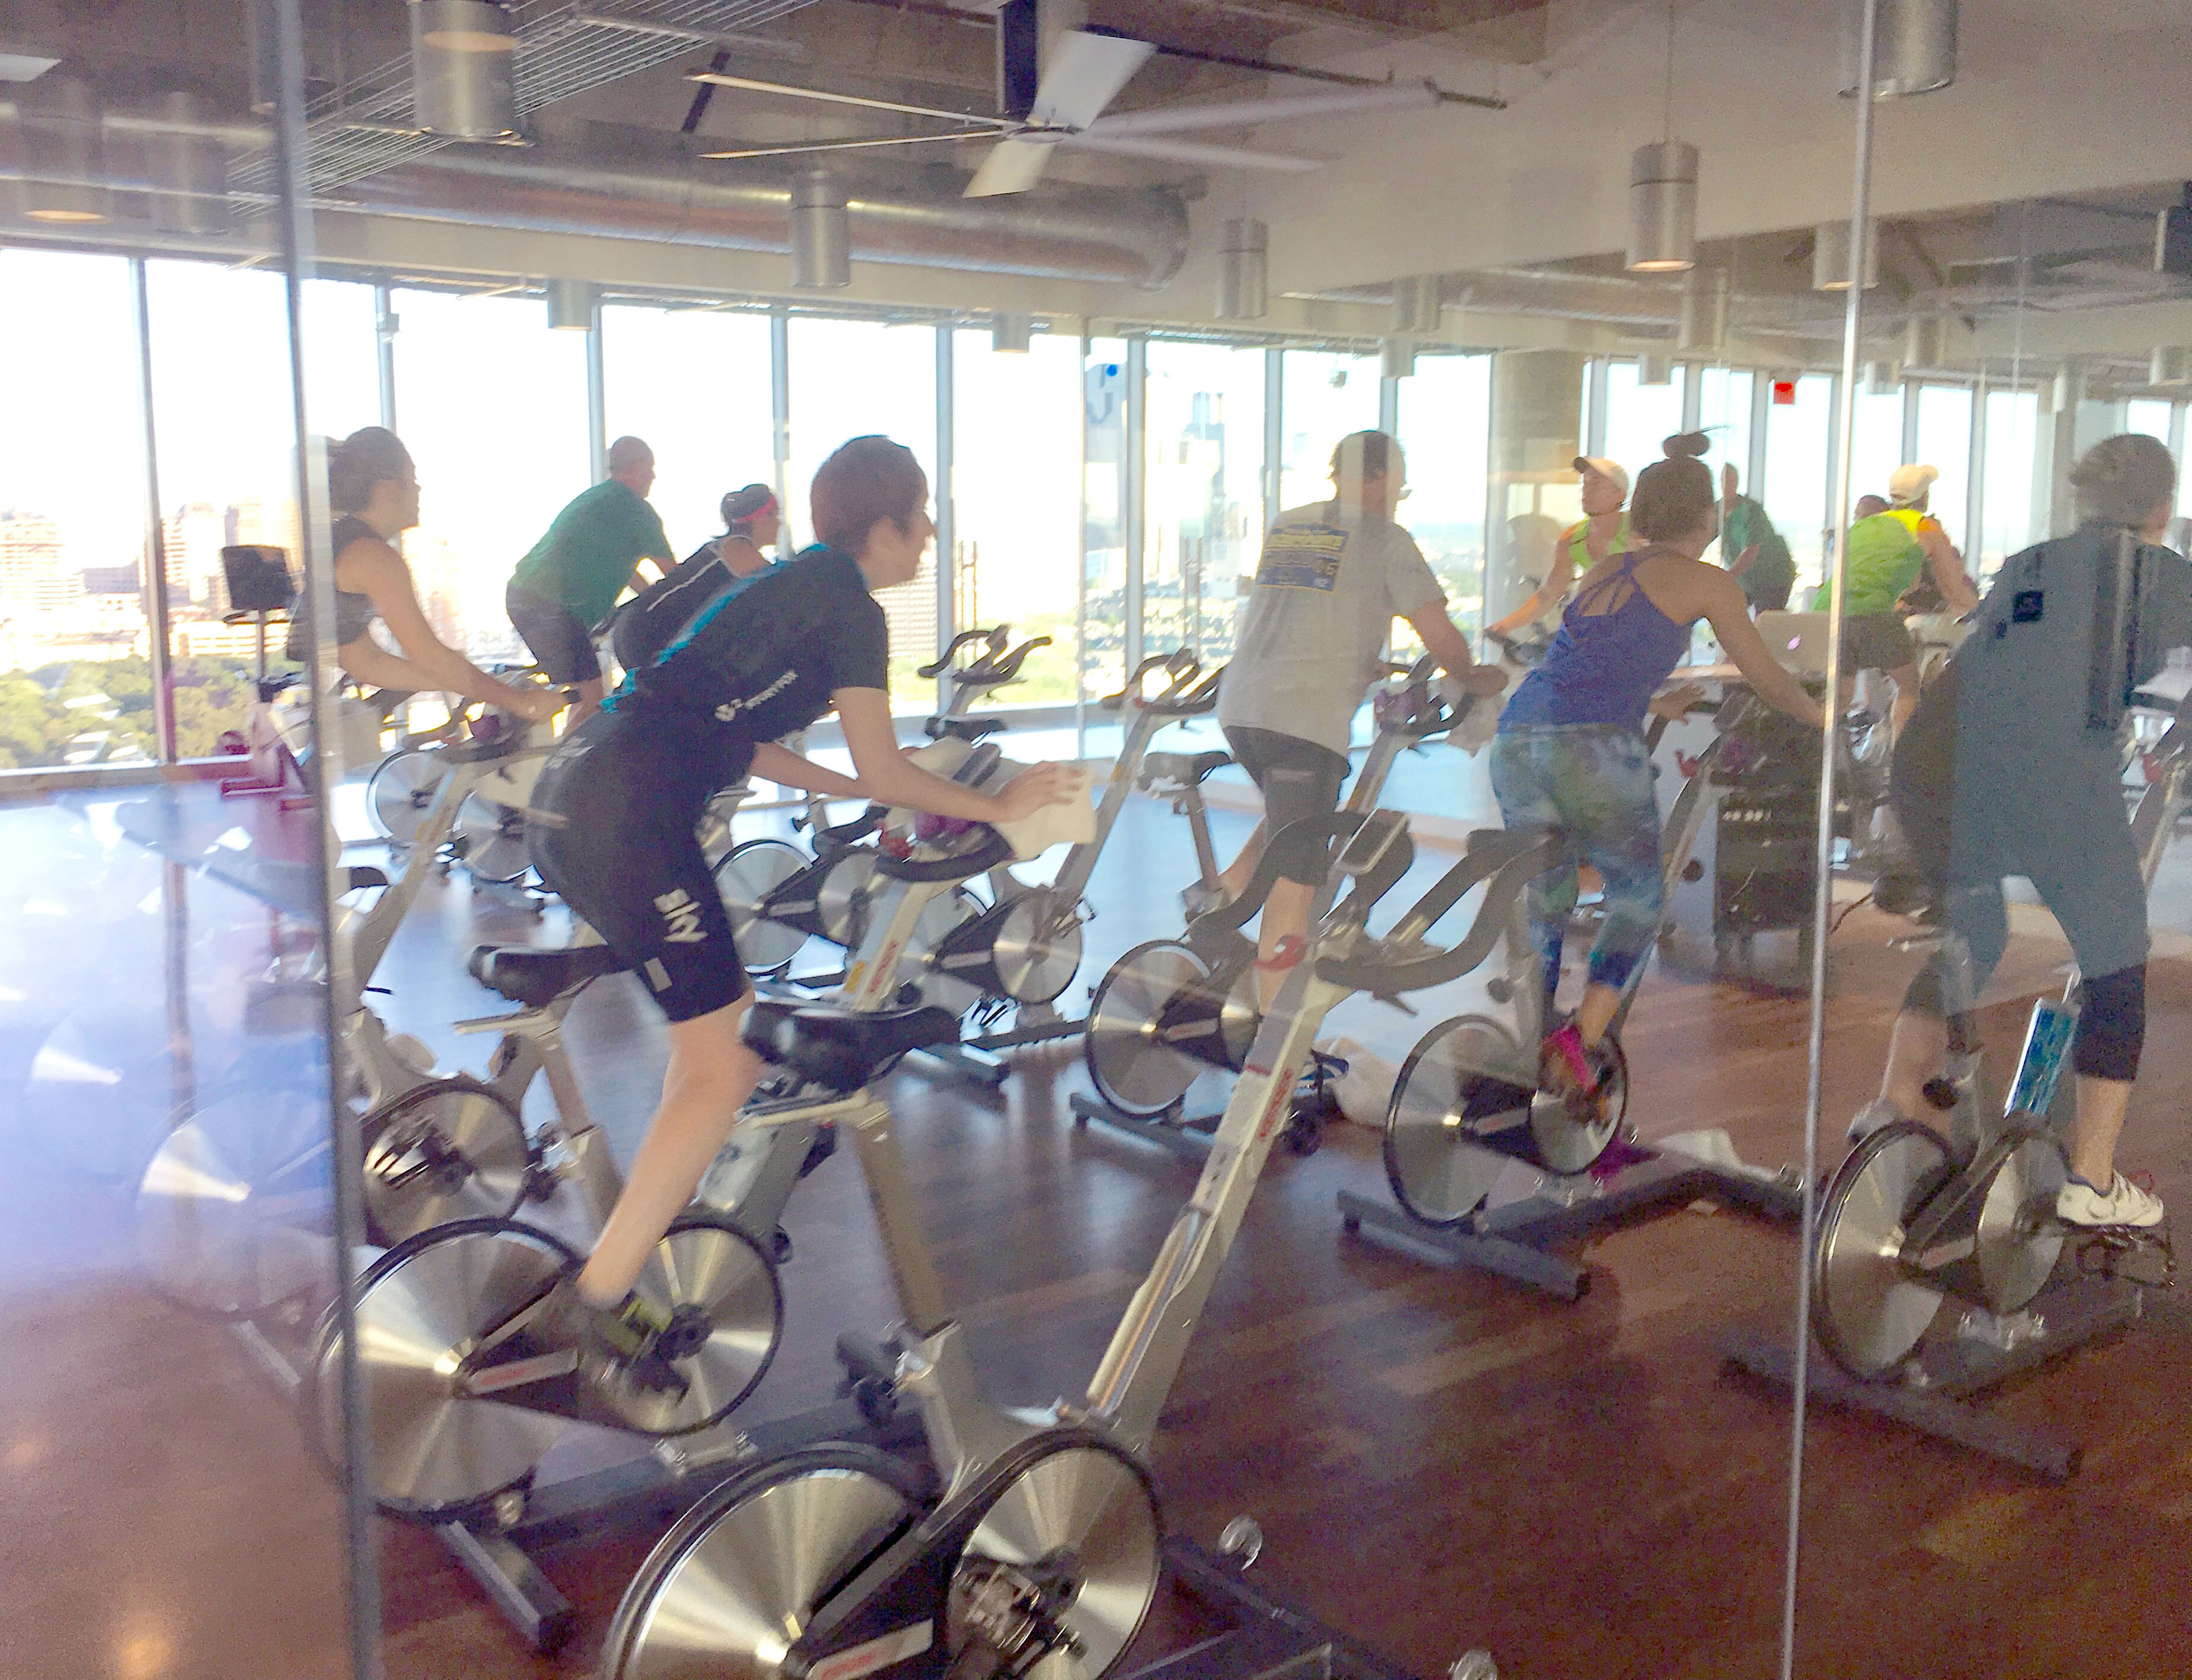 Photo of a group of people on stationary bikes participating in a Spin class.